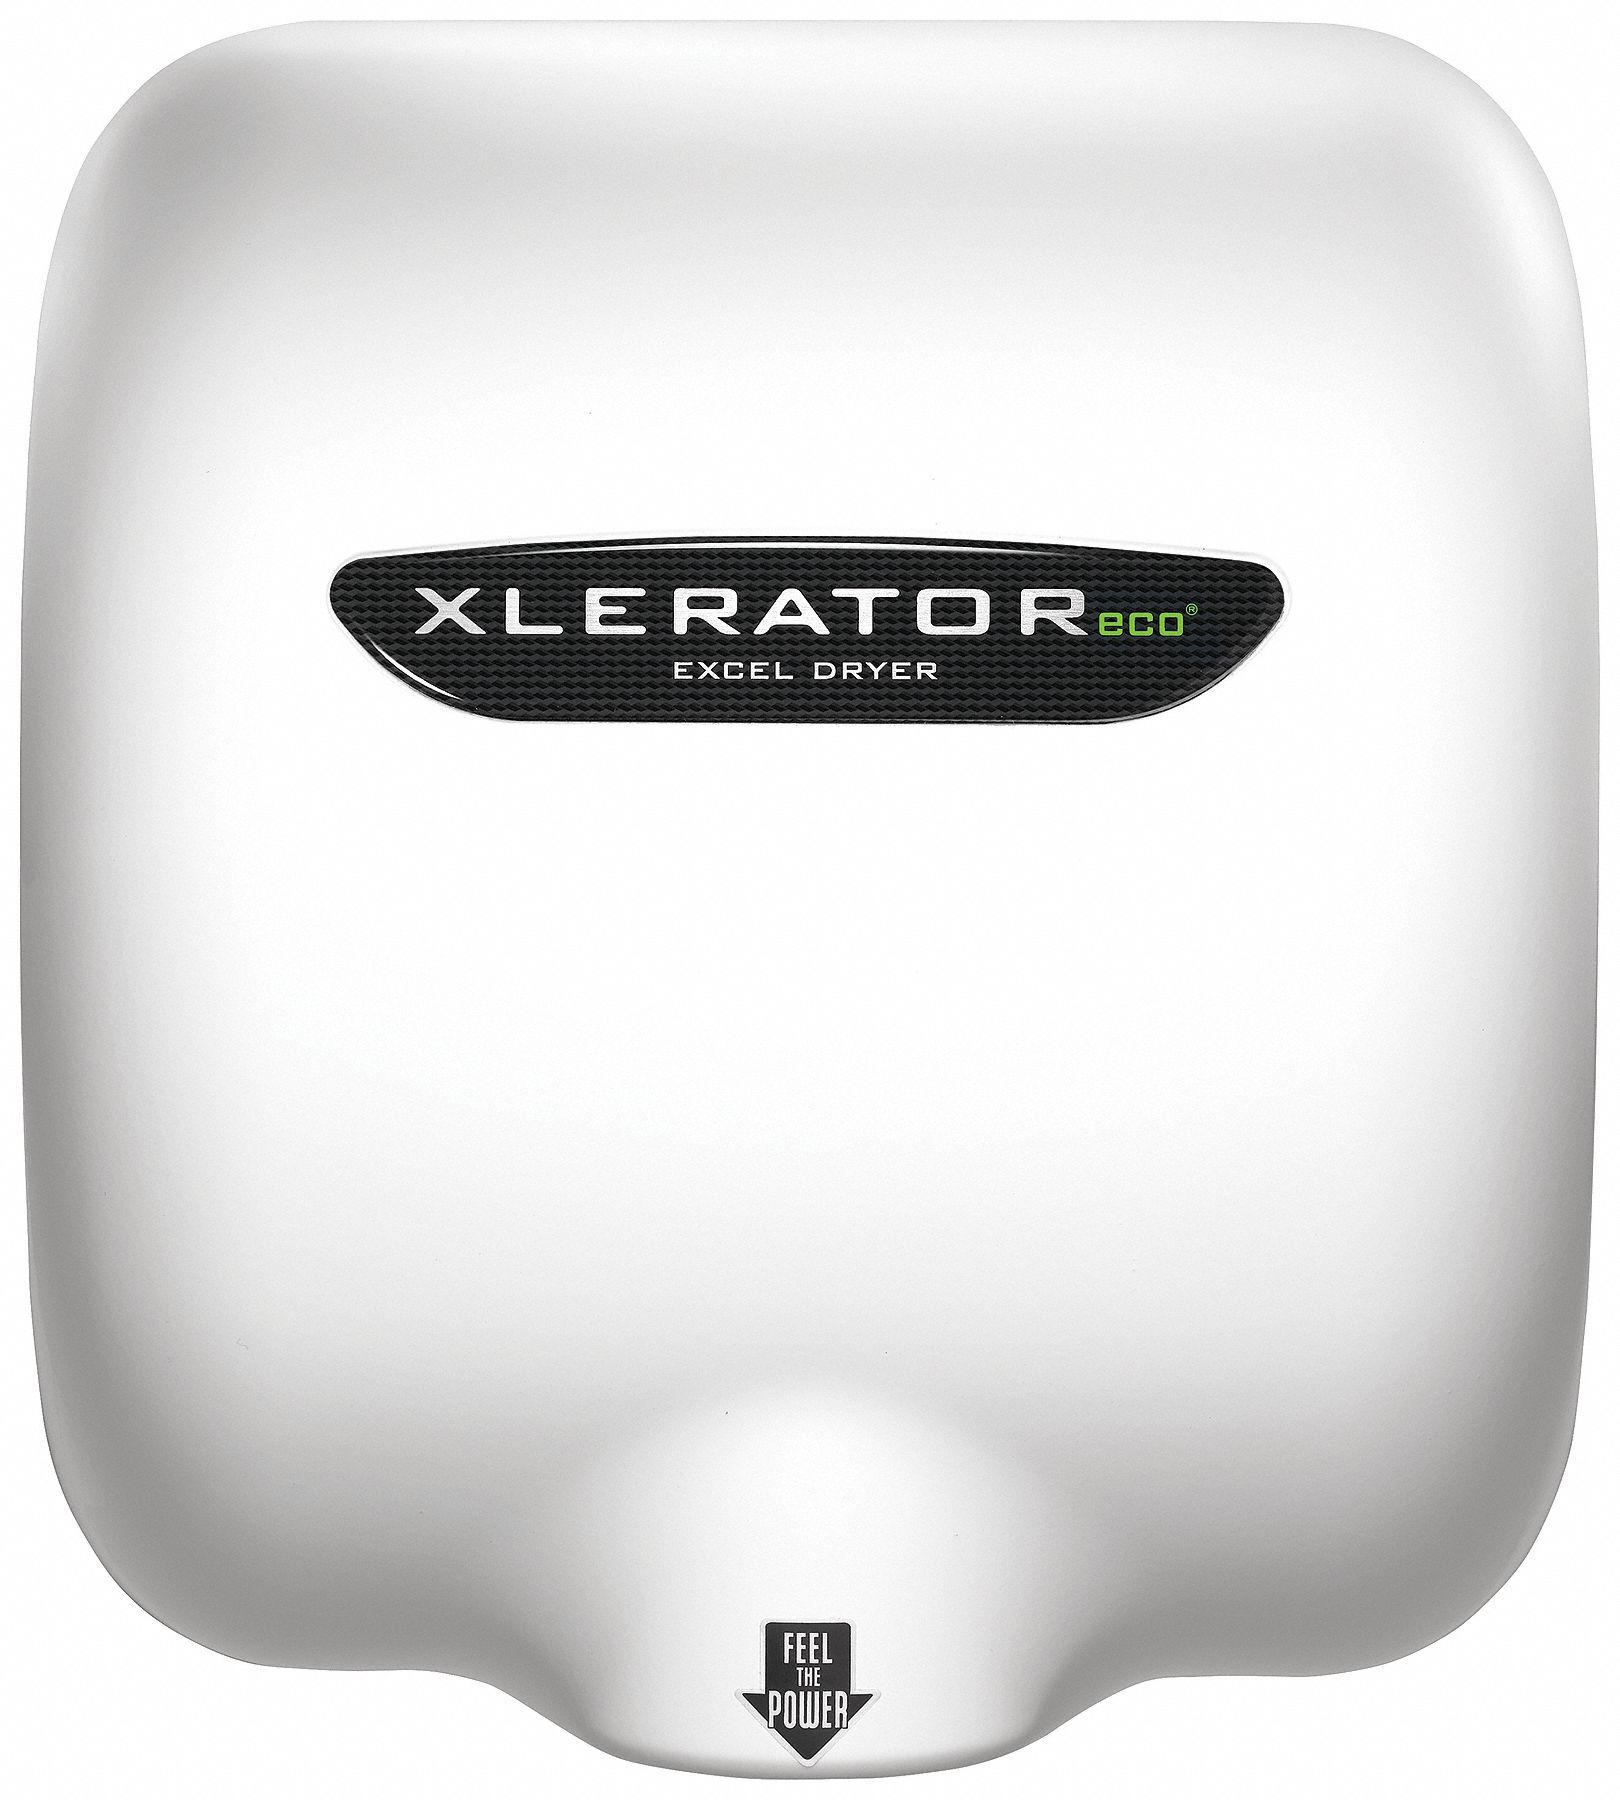 Hand Dryer: Integral, BMC, Auto, White, 12 sec Dry Time, 5.6/6.2 Amps, 208 to 277 Volt